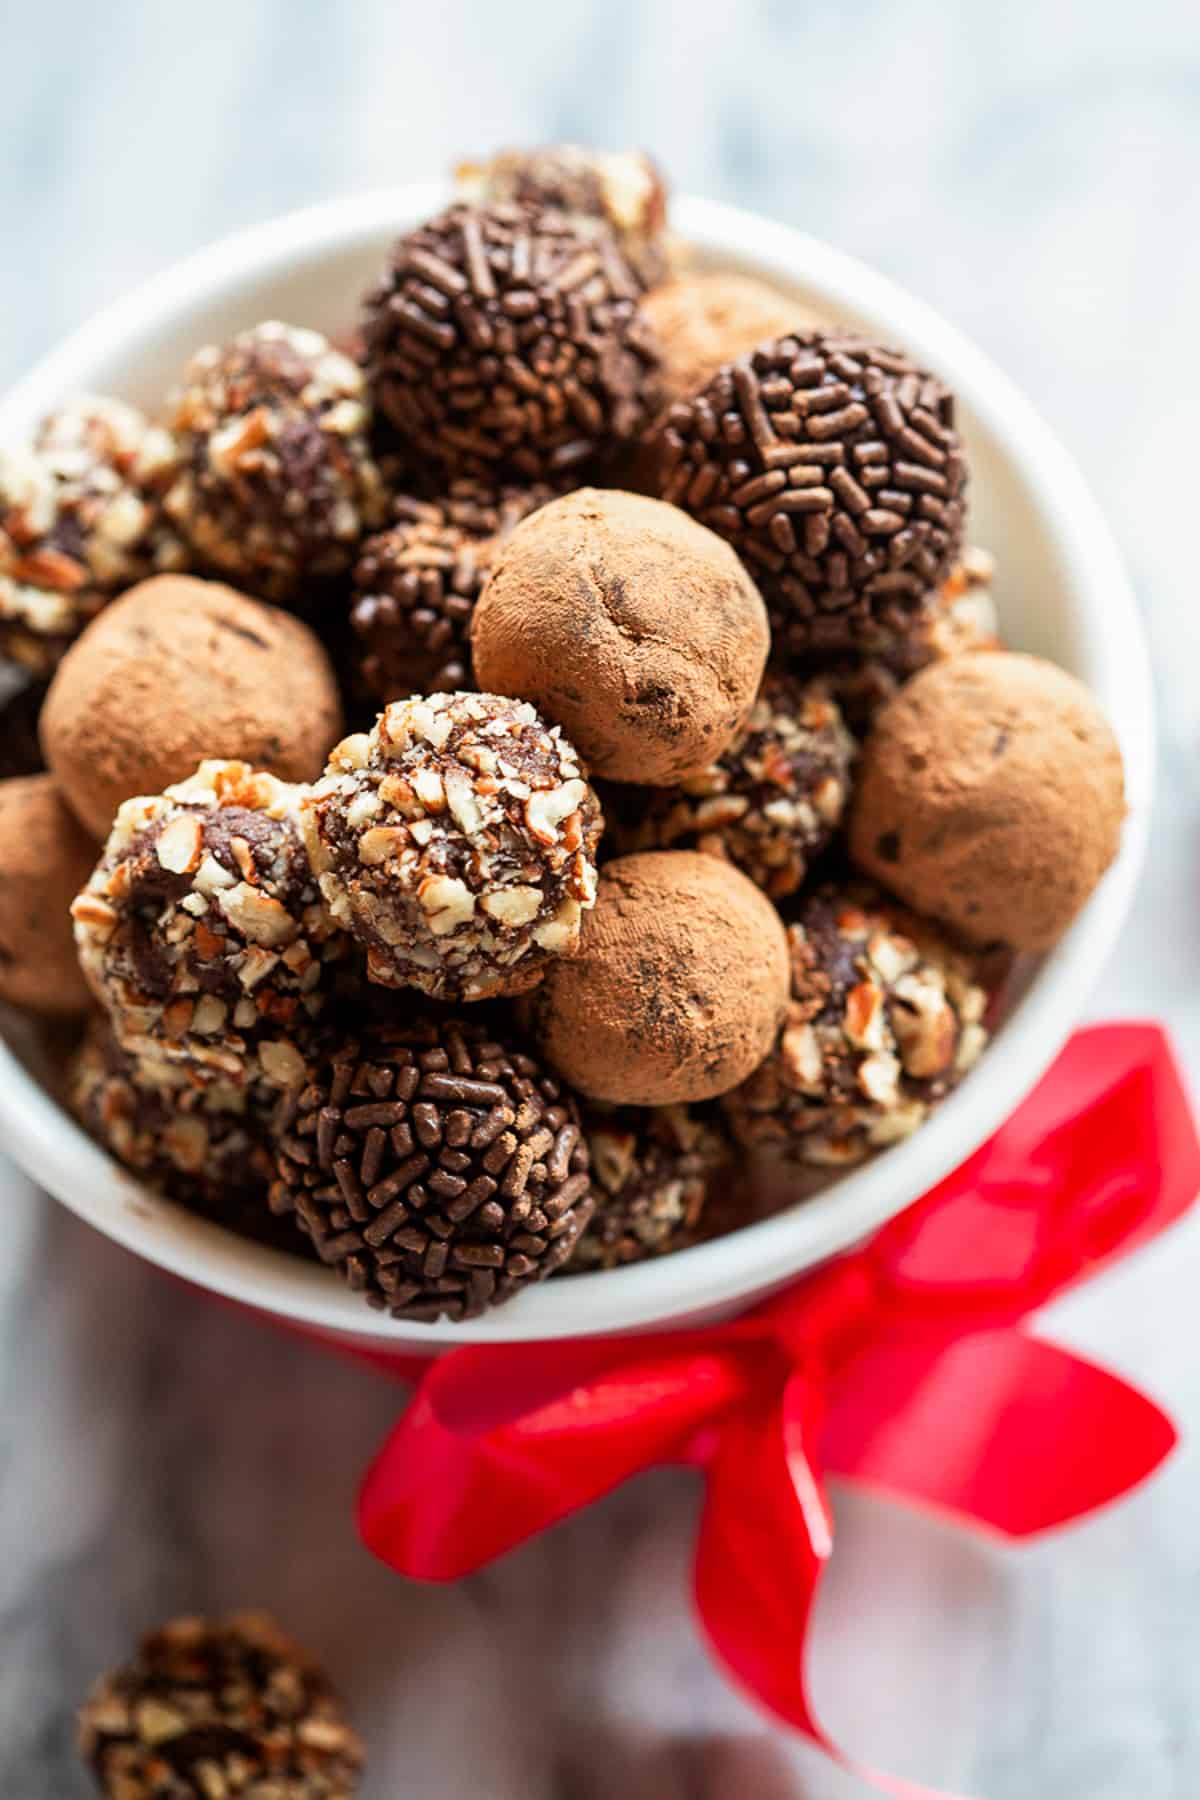 A variety of chocolate truffles homemade and in a white bowl with a red bow tied around it.